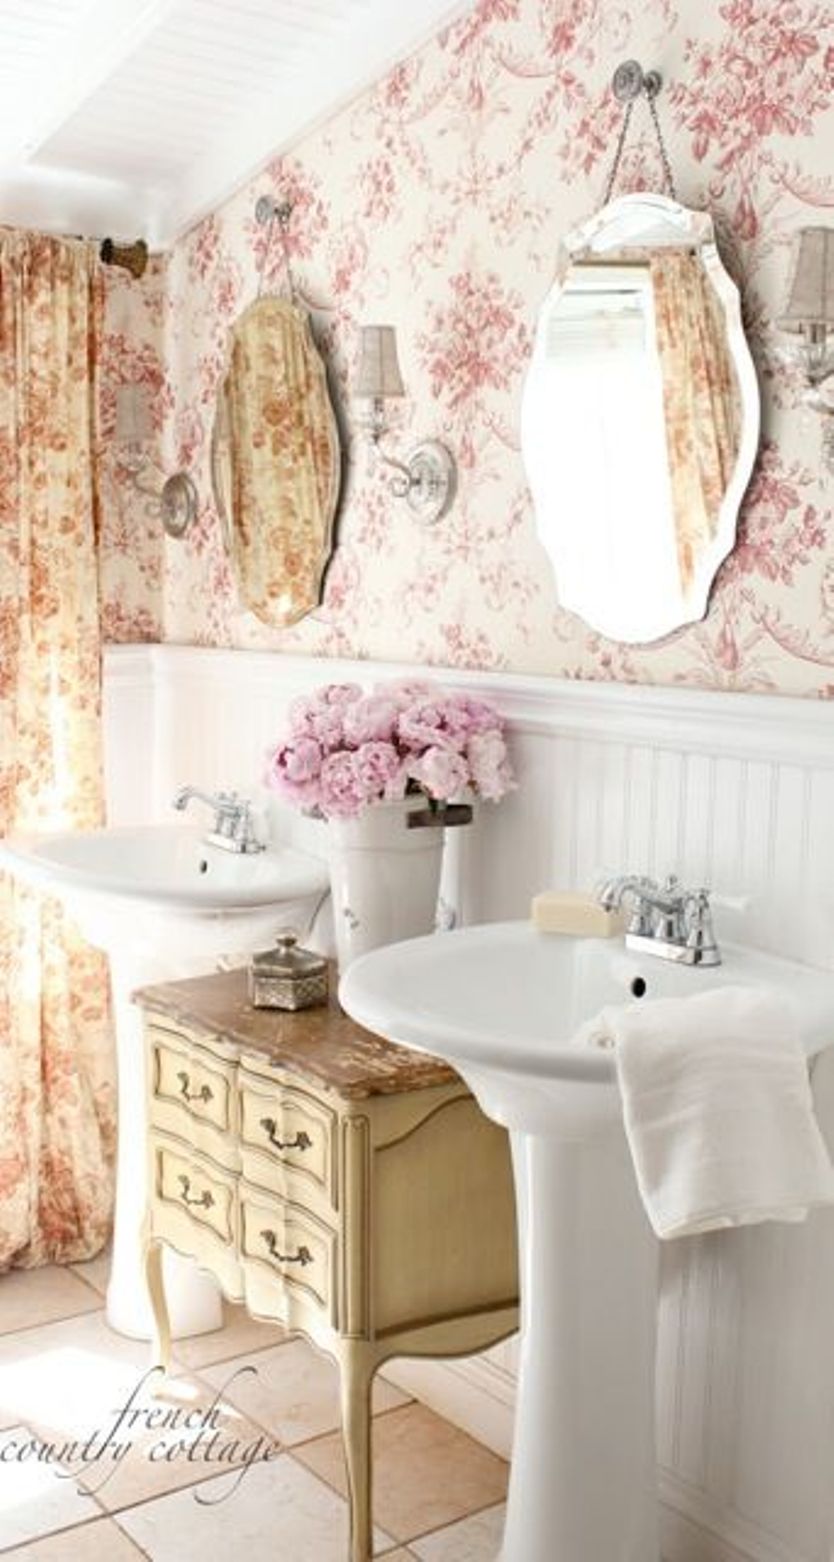 small-bathroom-makeovers-with-wainscoting-and-wallpaper-and-vintage-cabinet-between-two-pedestal-sinks-and-mirrors-and-flower-style-curtain